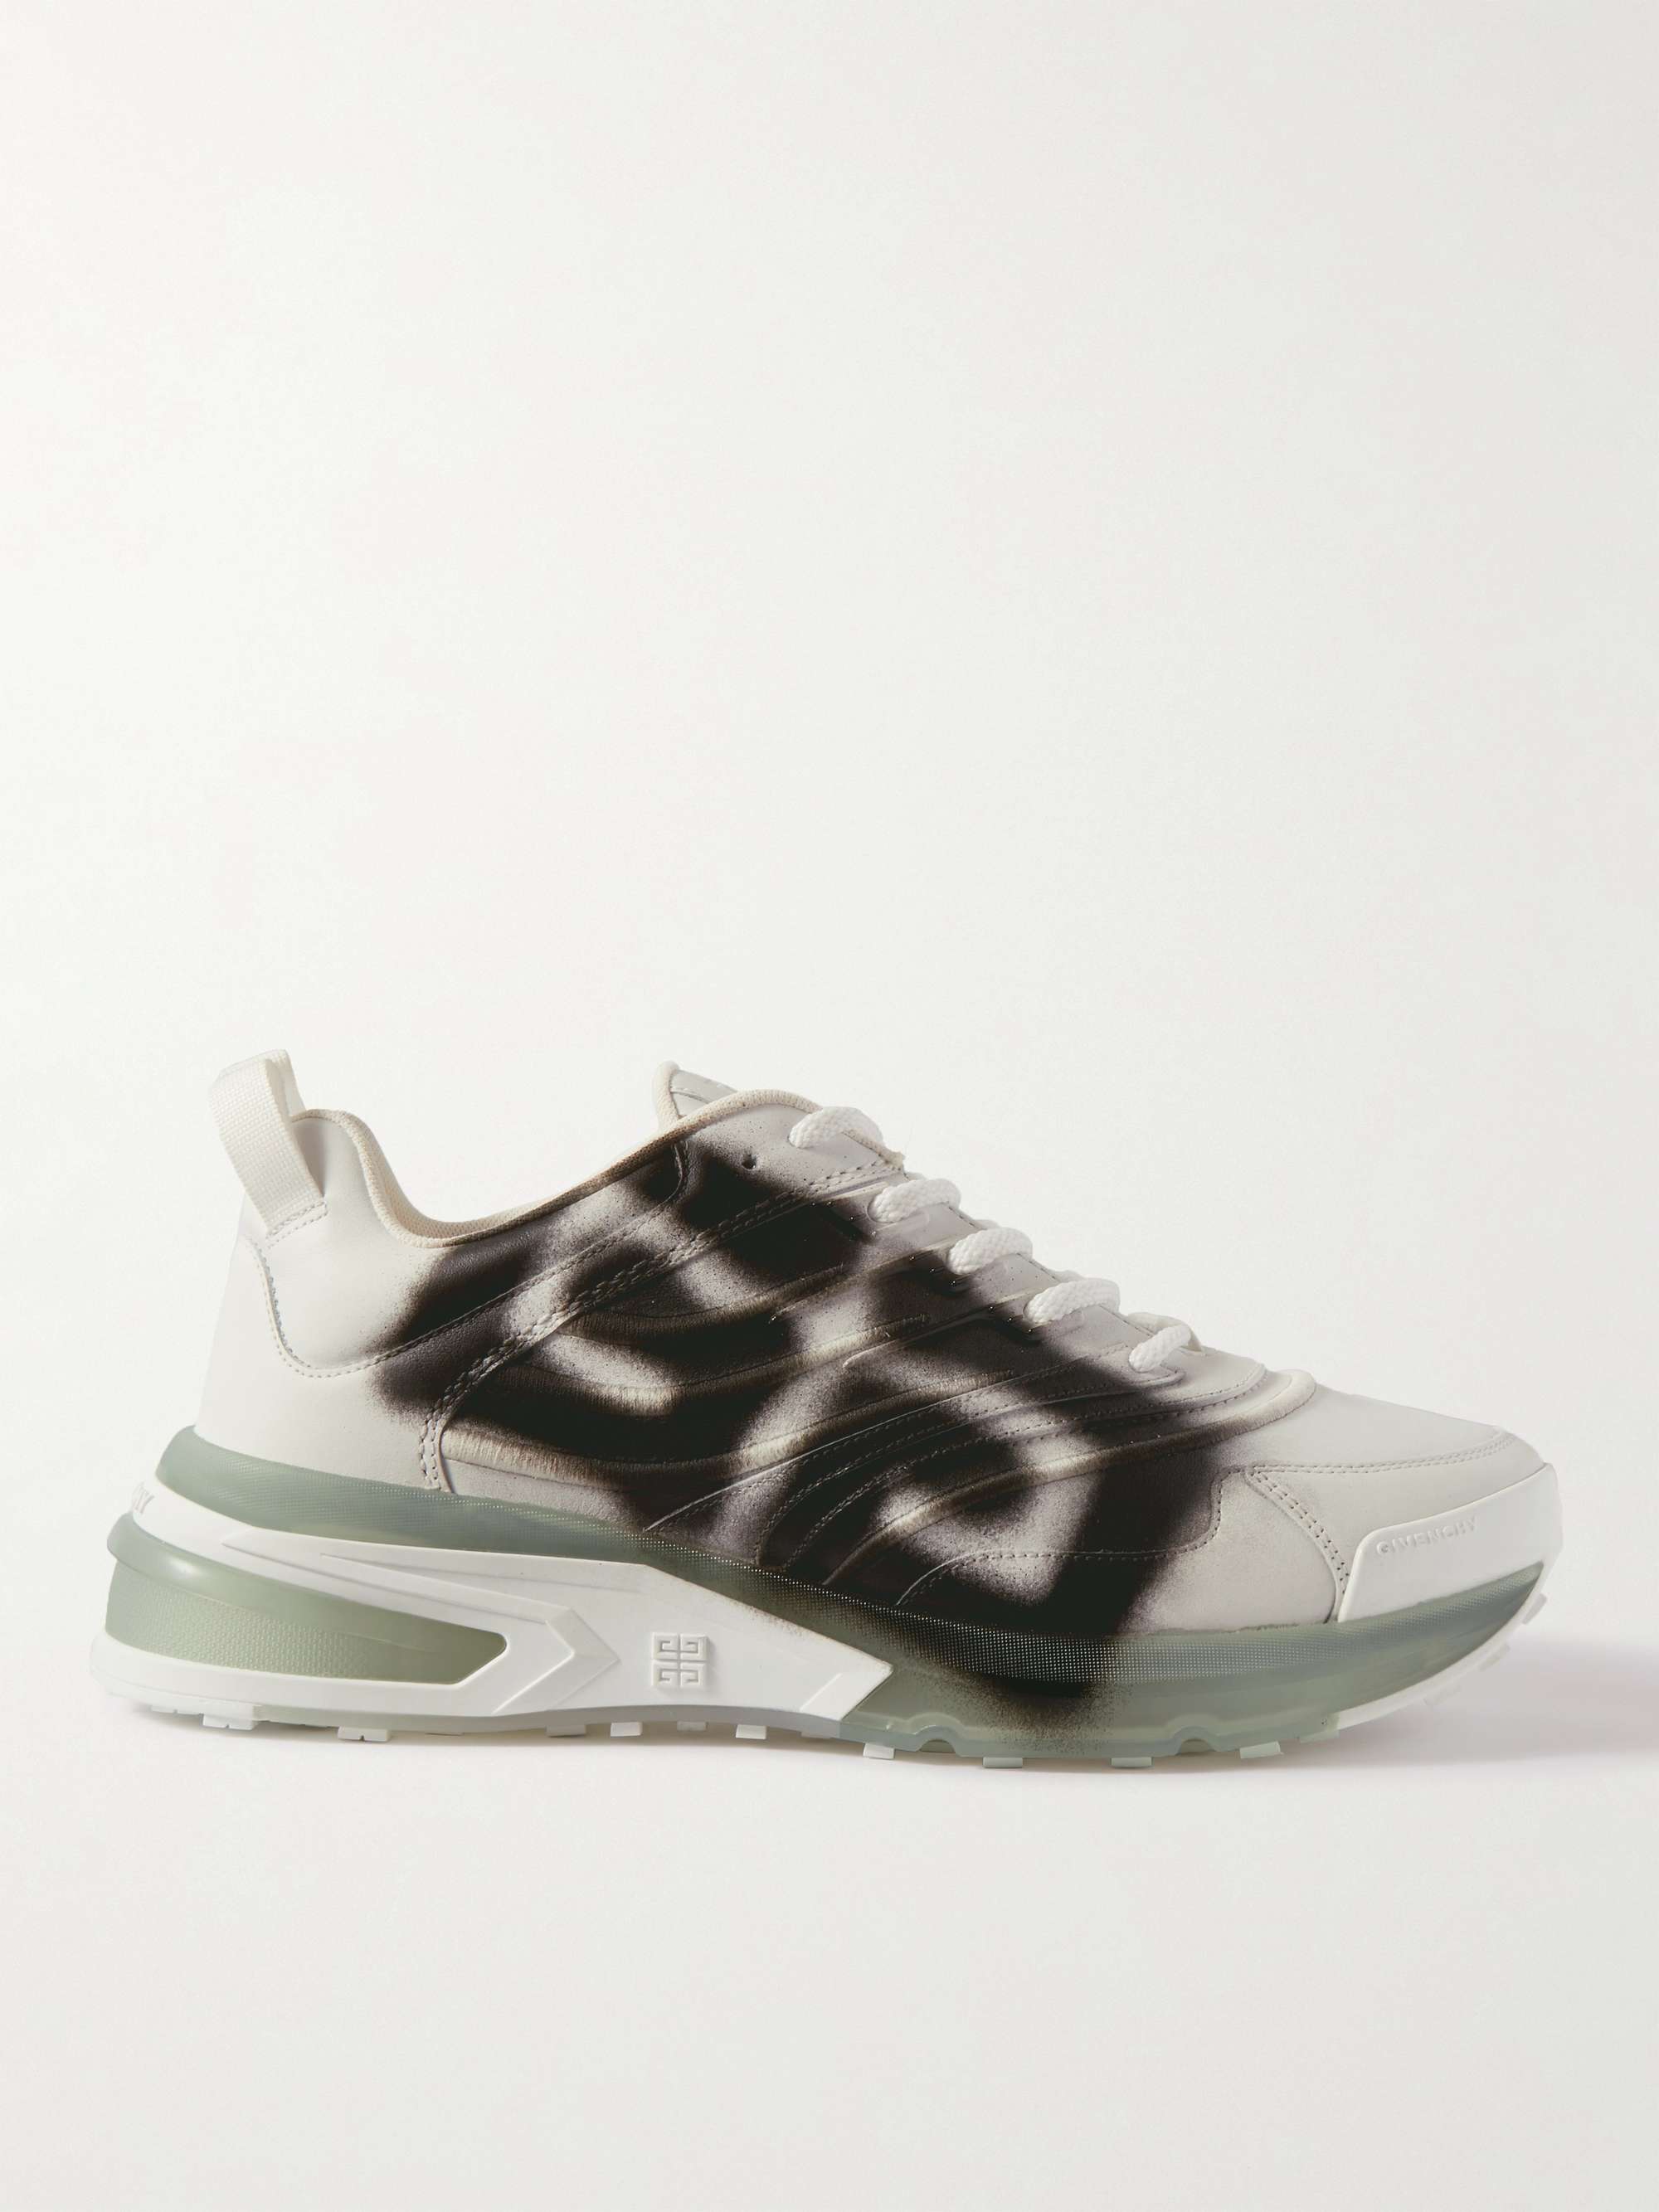 + Chito Giv 1 Logo-Print Leather Sneakers